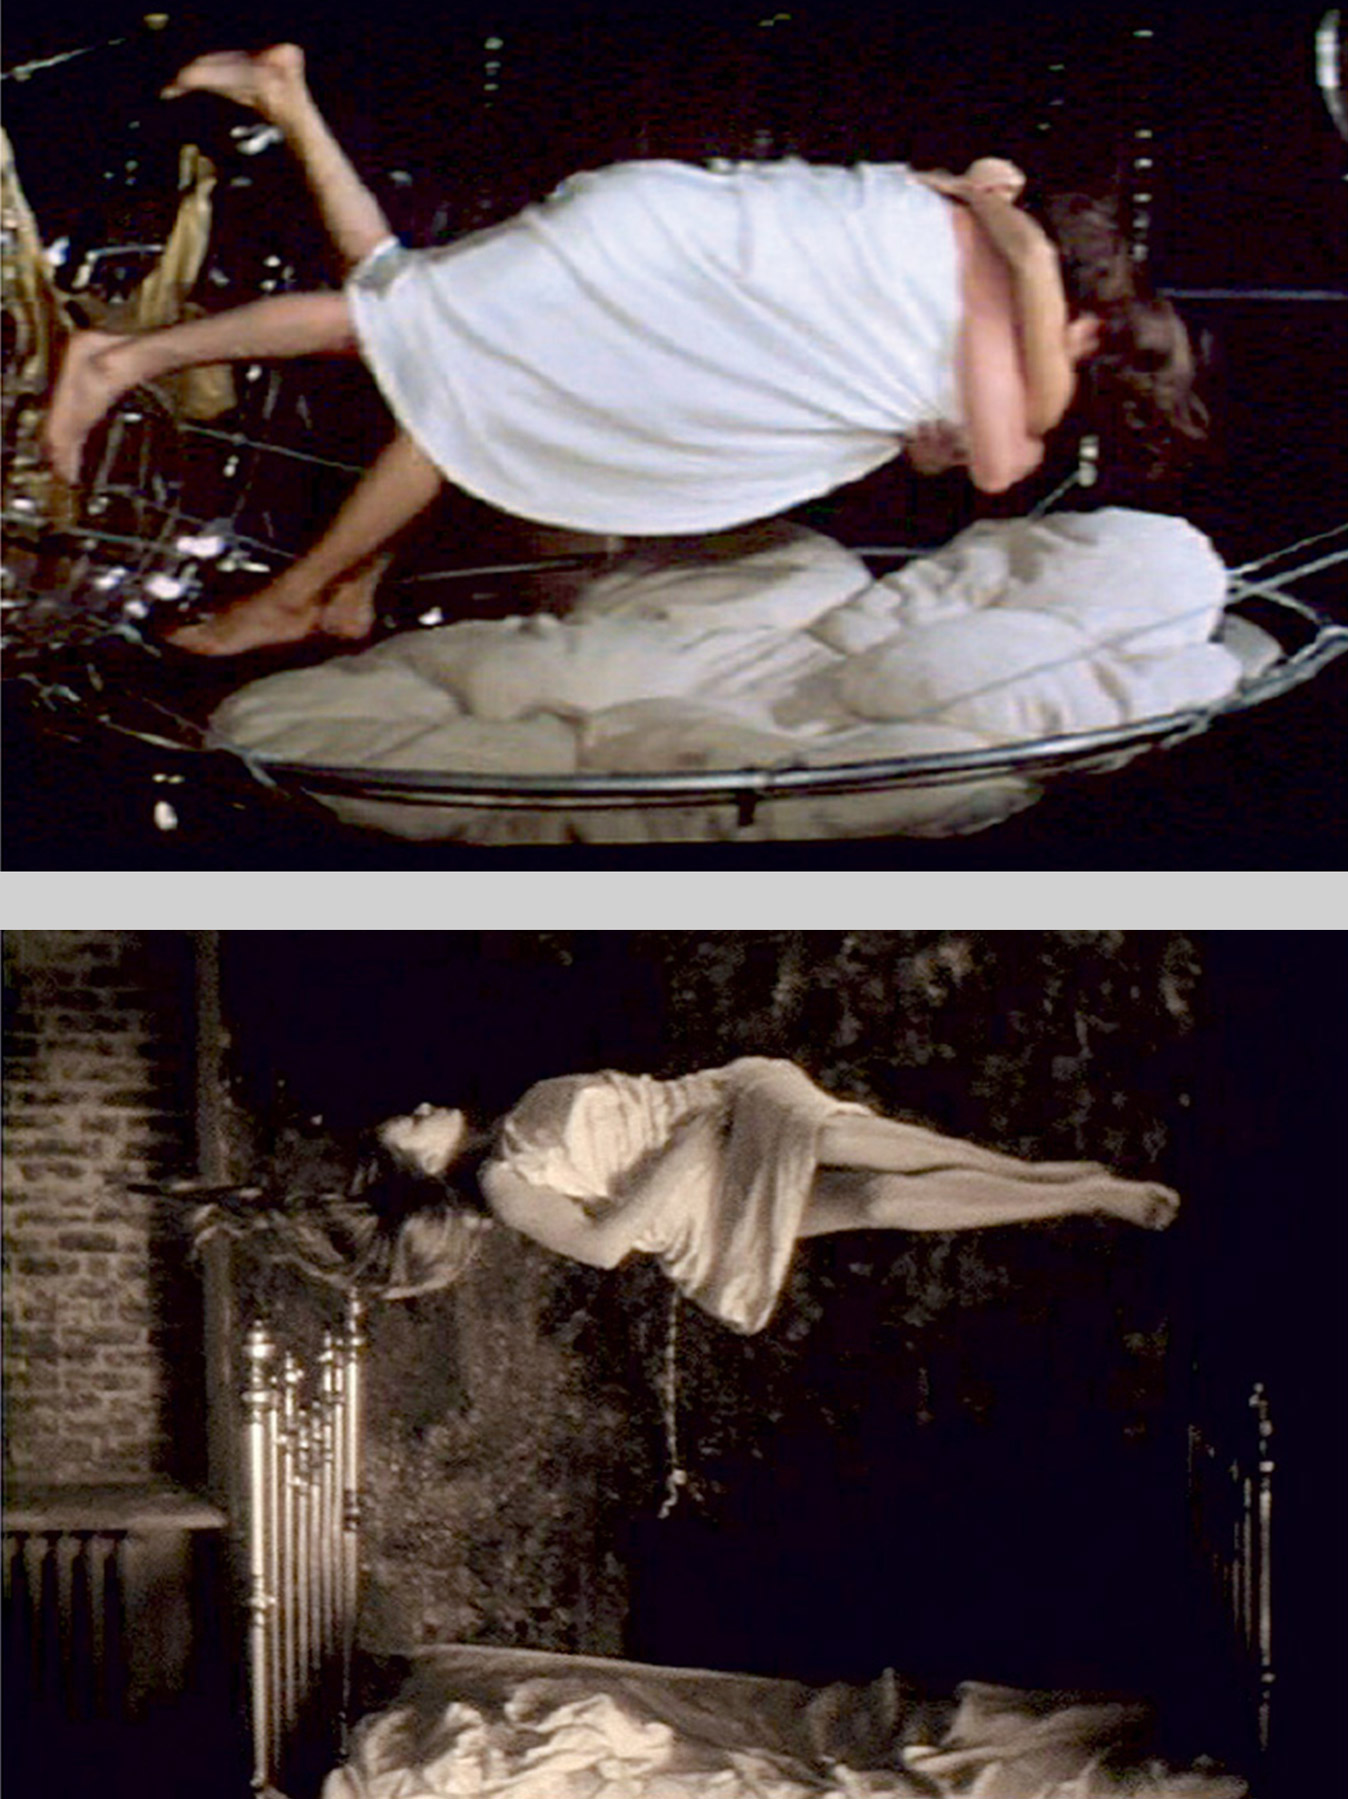 Two images, the first of which is a 1979 still from Lewis Gilbert's film Moonraker showing James Bond levitating with Holly Goodhead. The second is 1975 still from Andrei Tarkovsky's film The Mirror which shows a woman levitating. 